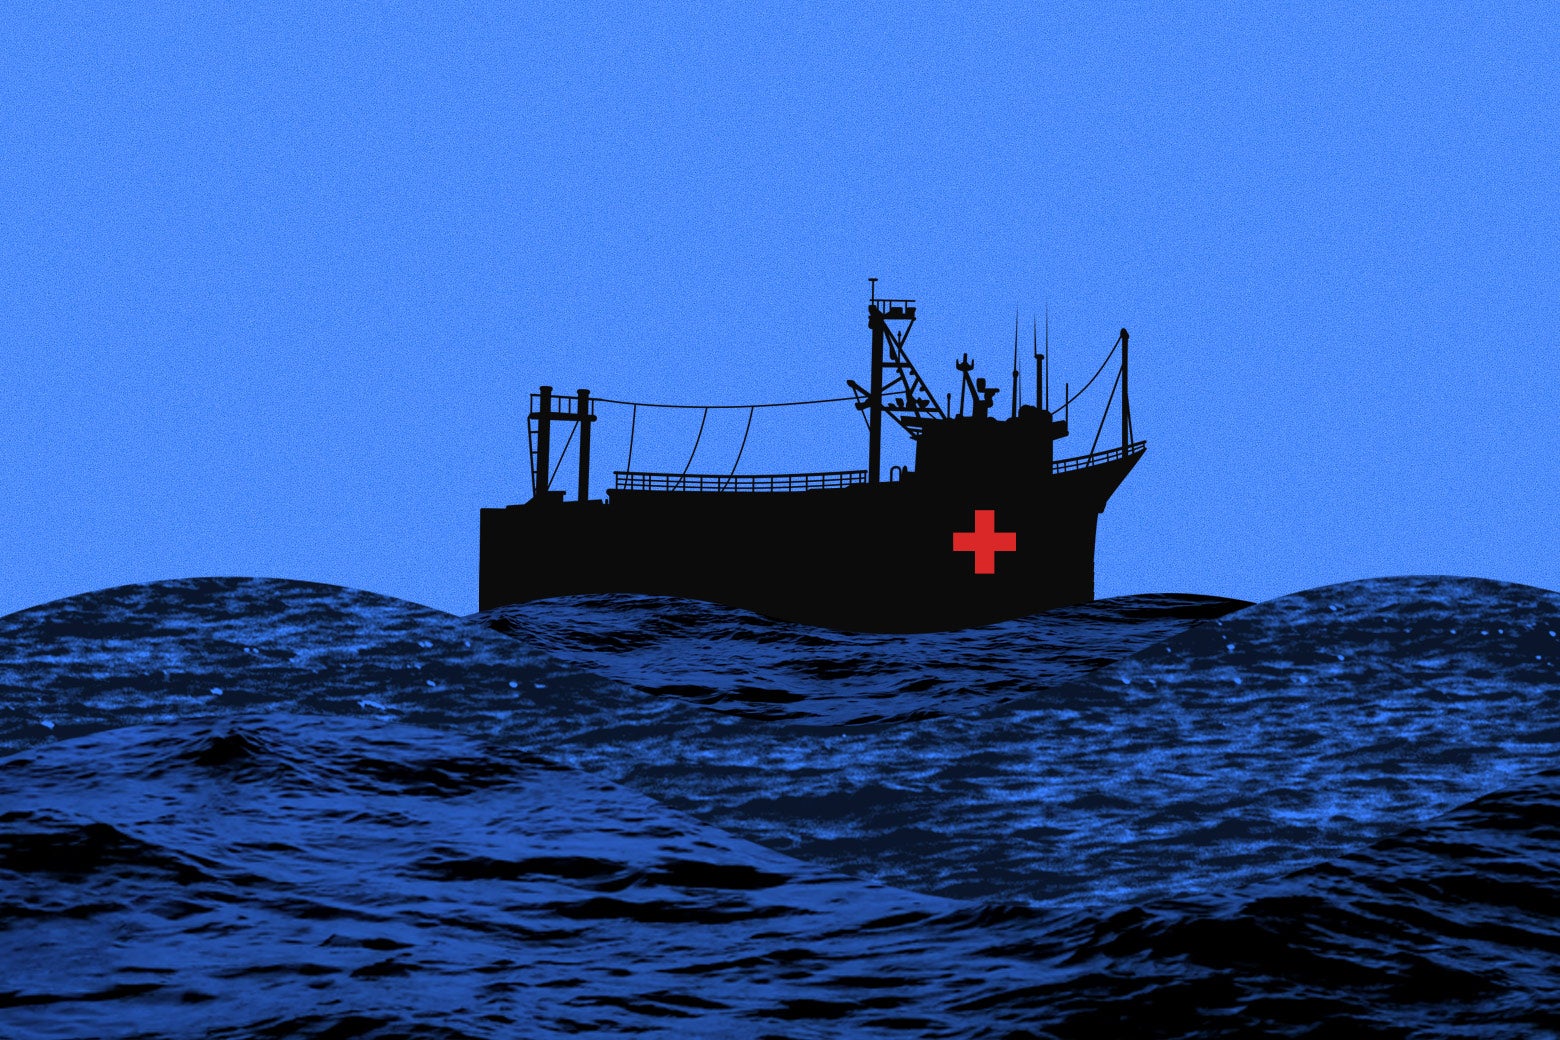 A silhouette of a boat with a red cross on it floats on blue water.